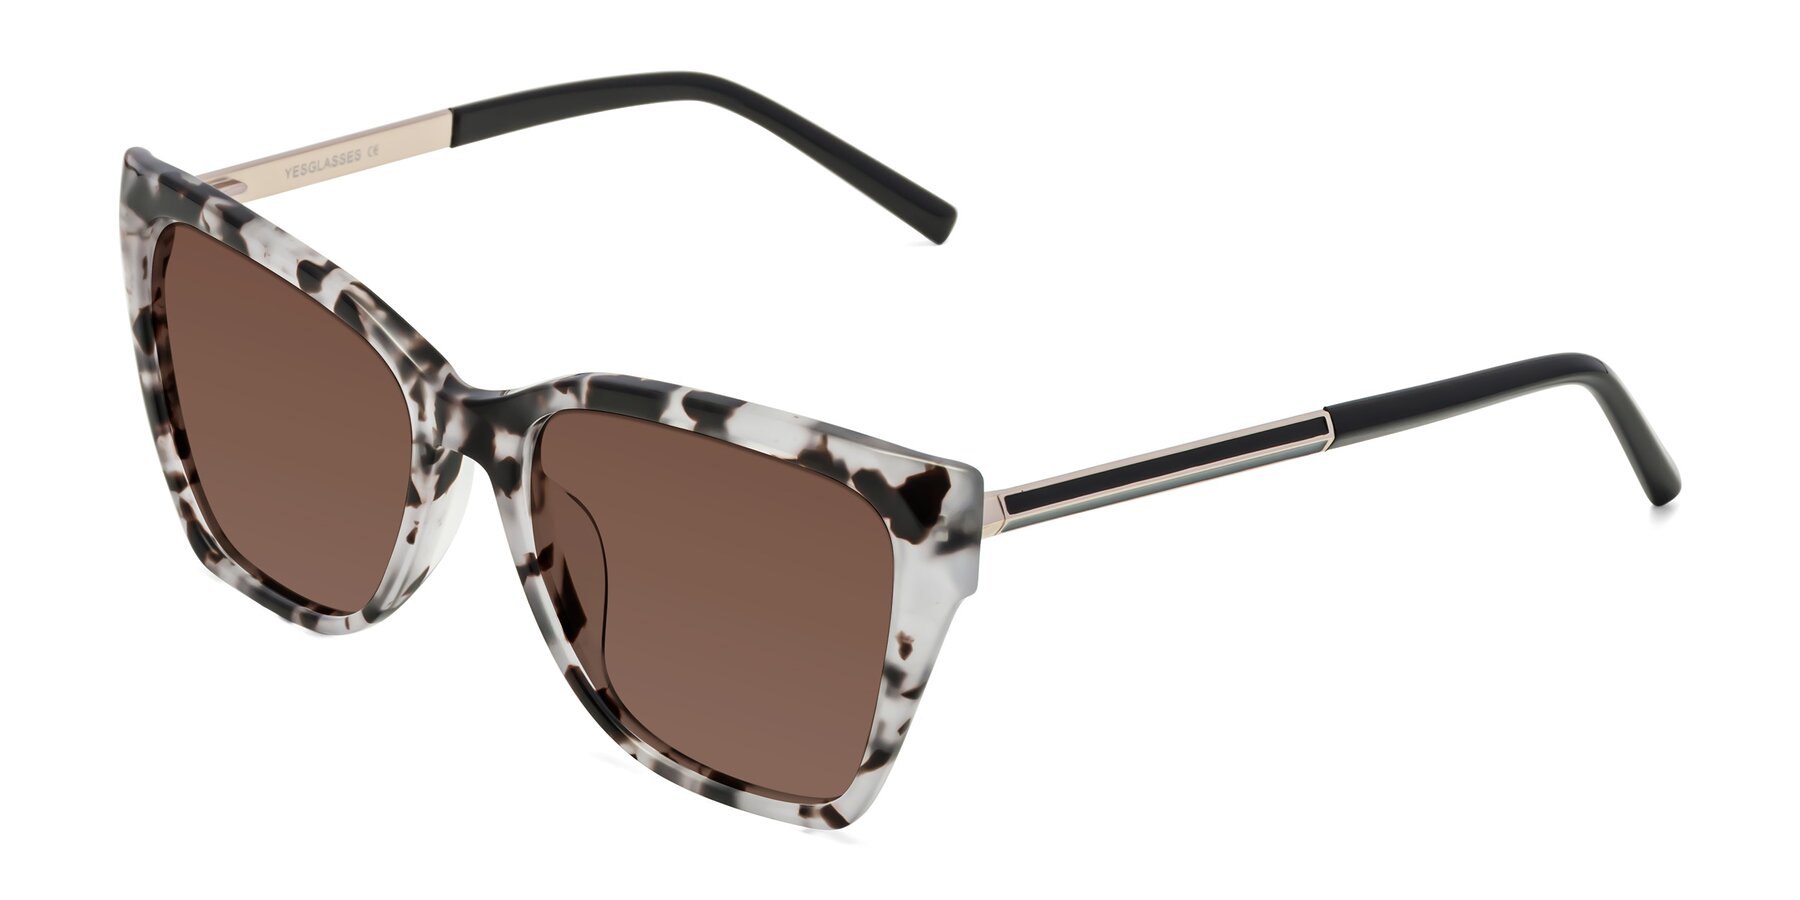 Angle of Swartz in White Tortoise with Brown Tinted Lenses